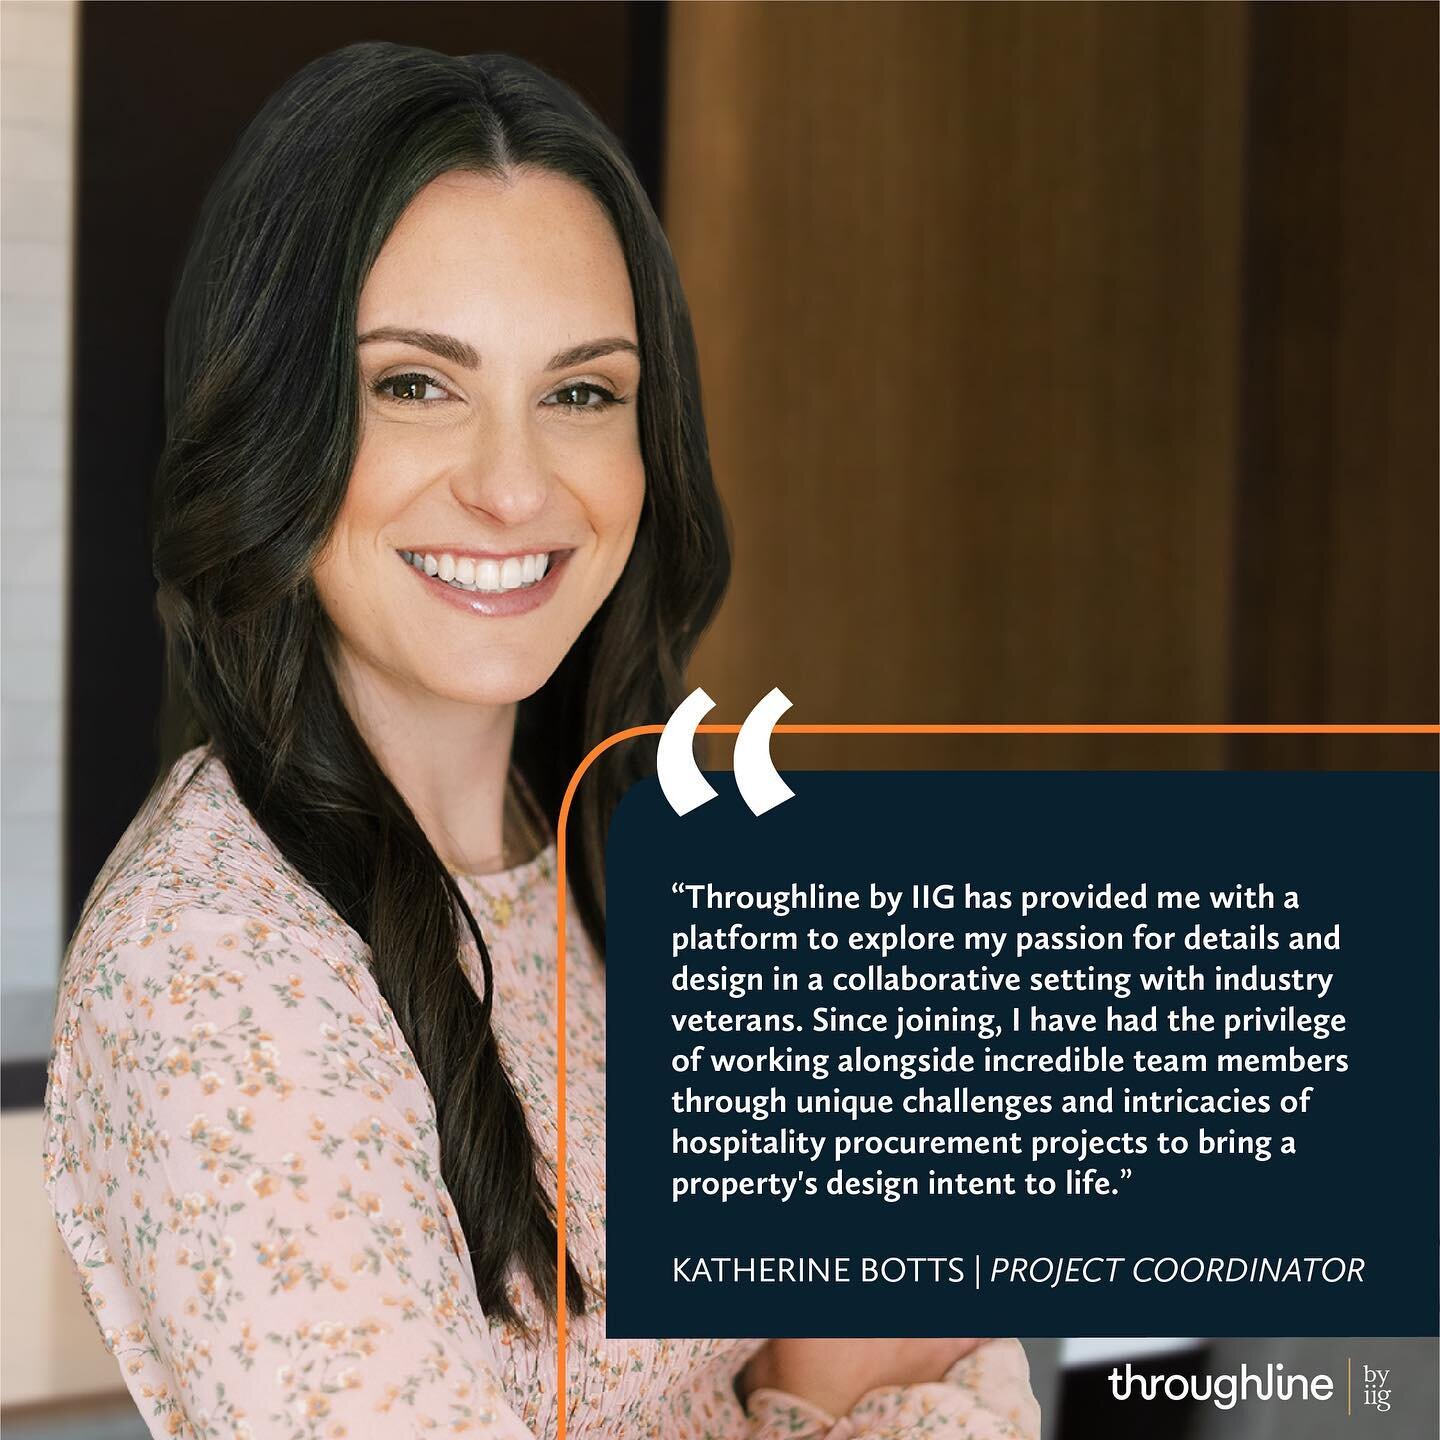 Meet Katherine Botts, project coordinator at Throughline. 👋

As an experienced order processer, scheduler, and problem solver, Katherine plays a major role in ensuring project deliverables are met. In her current position, she navigates challenges i